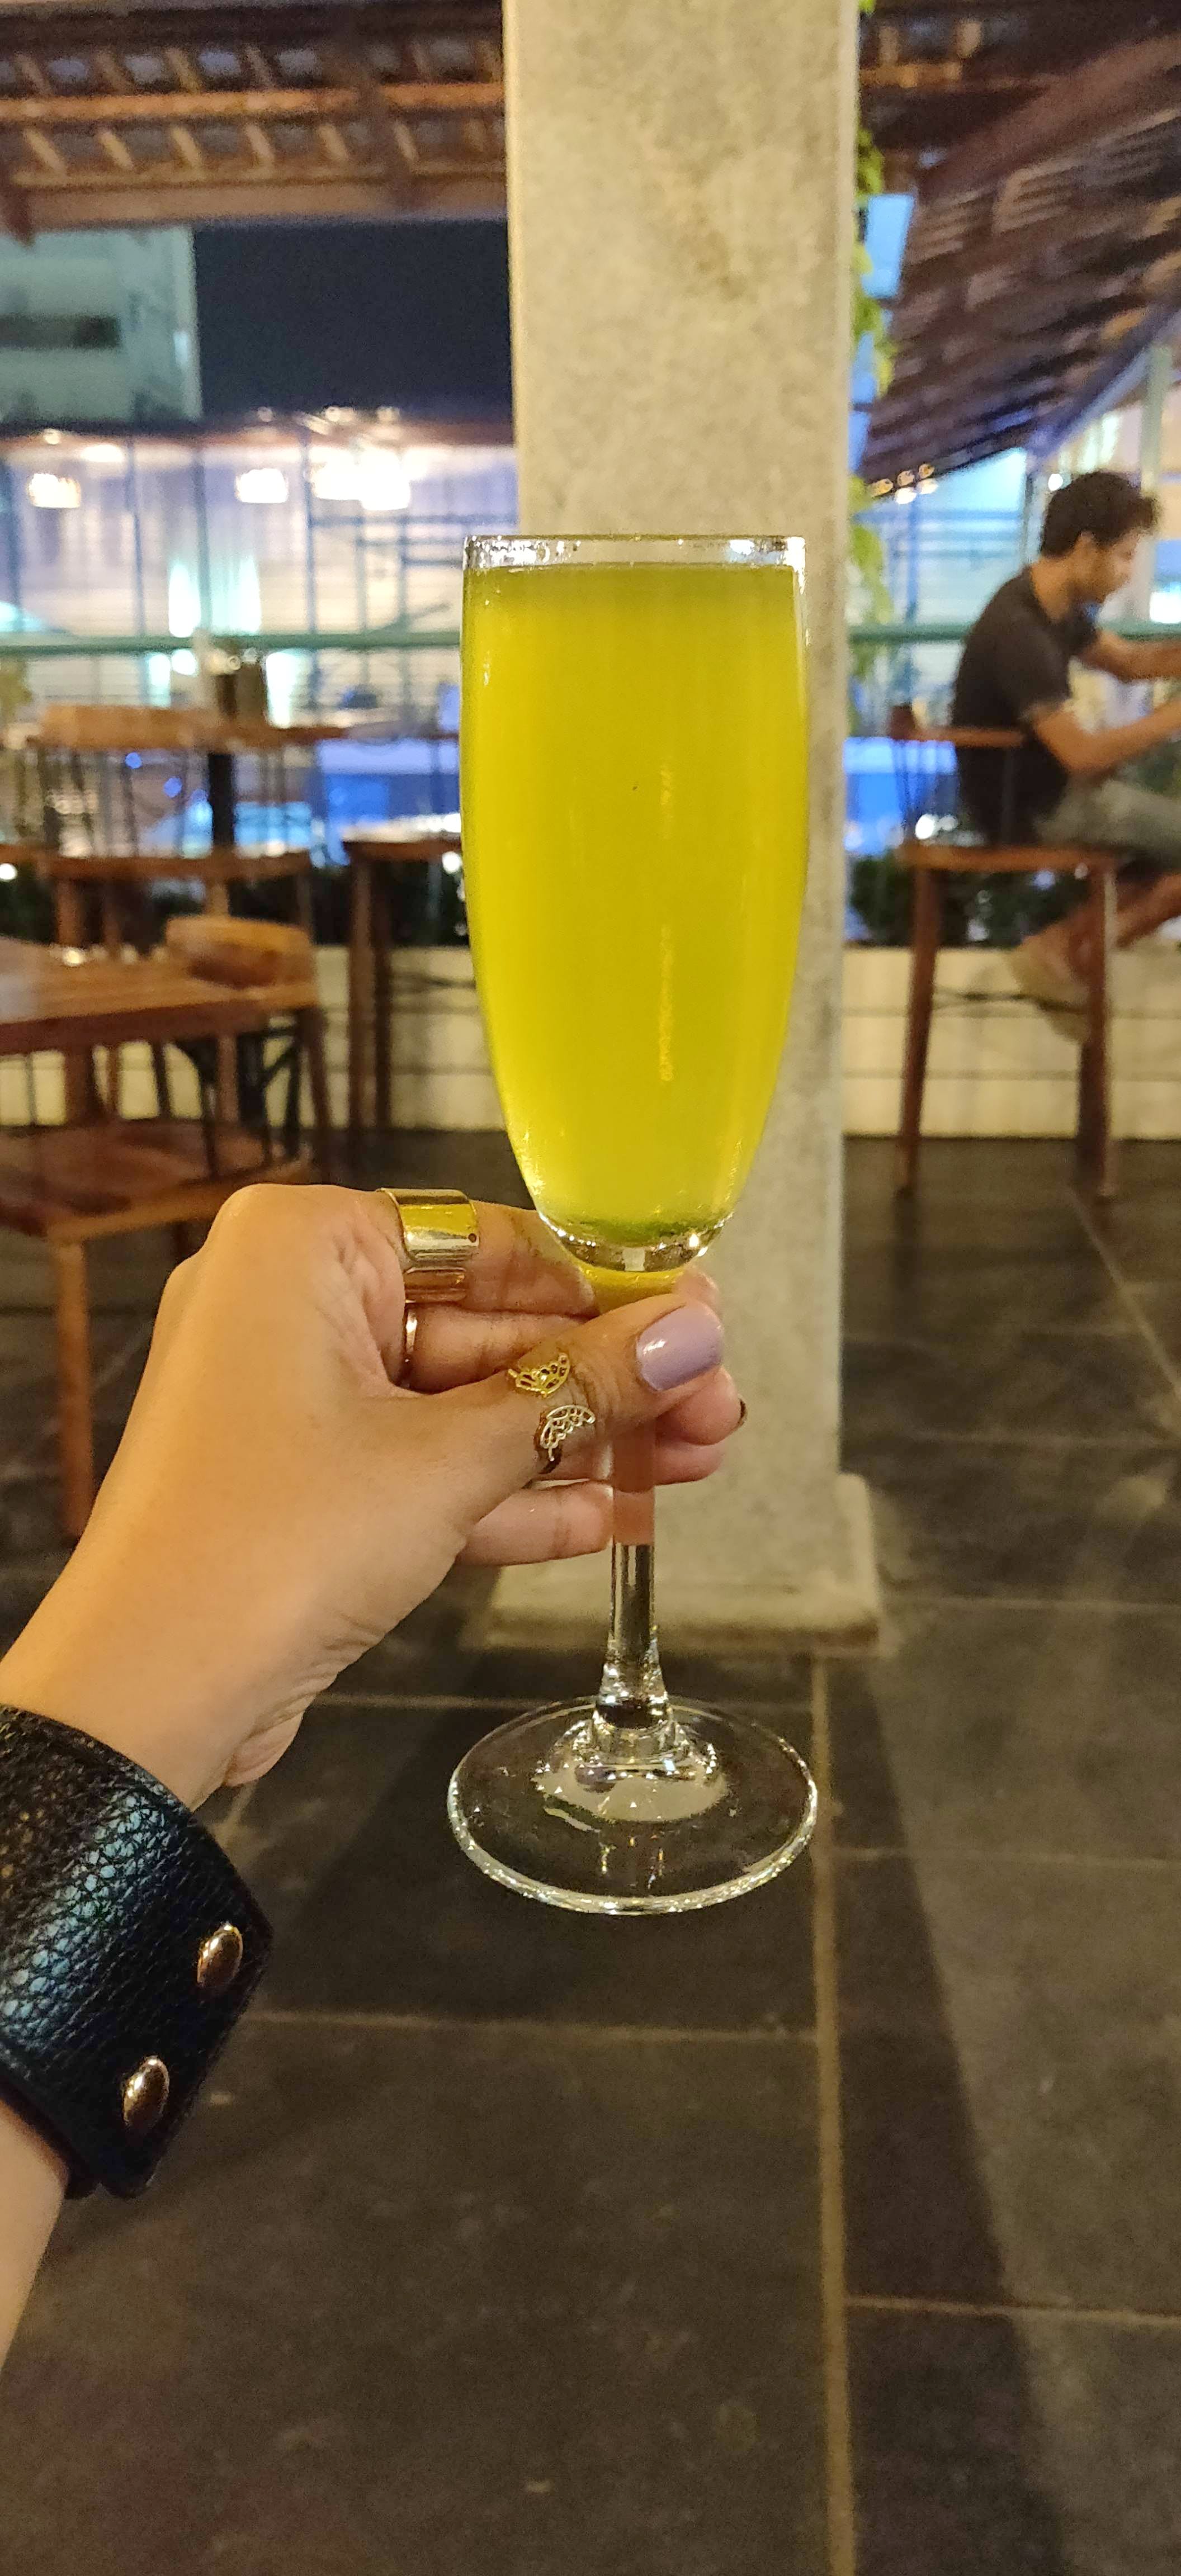 Drink,Alcoholic beverage,Champagne cocktail,Distilled beverage,Cocktail,Juice,Champagne stemware,Agua de valencia,Harvey wallbanger,Non-alcoholic beverage